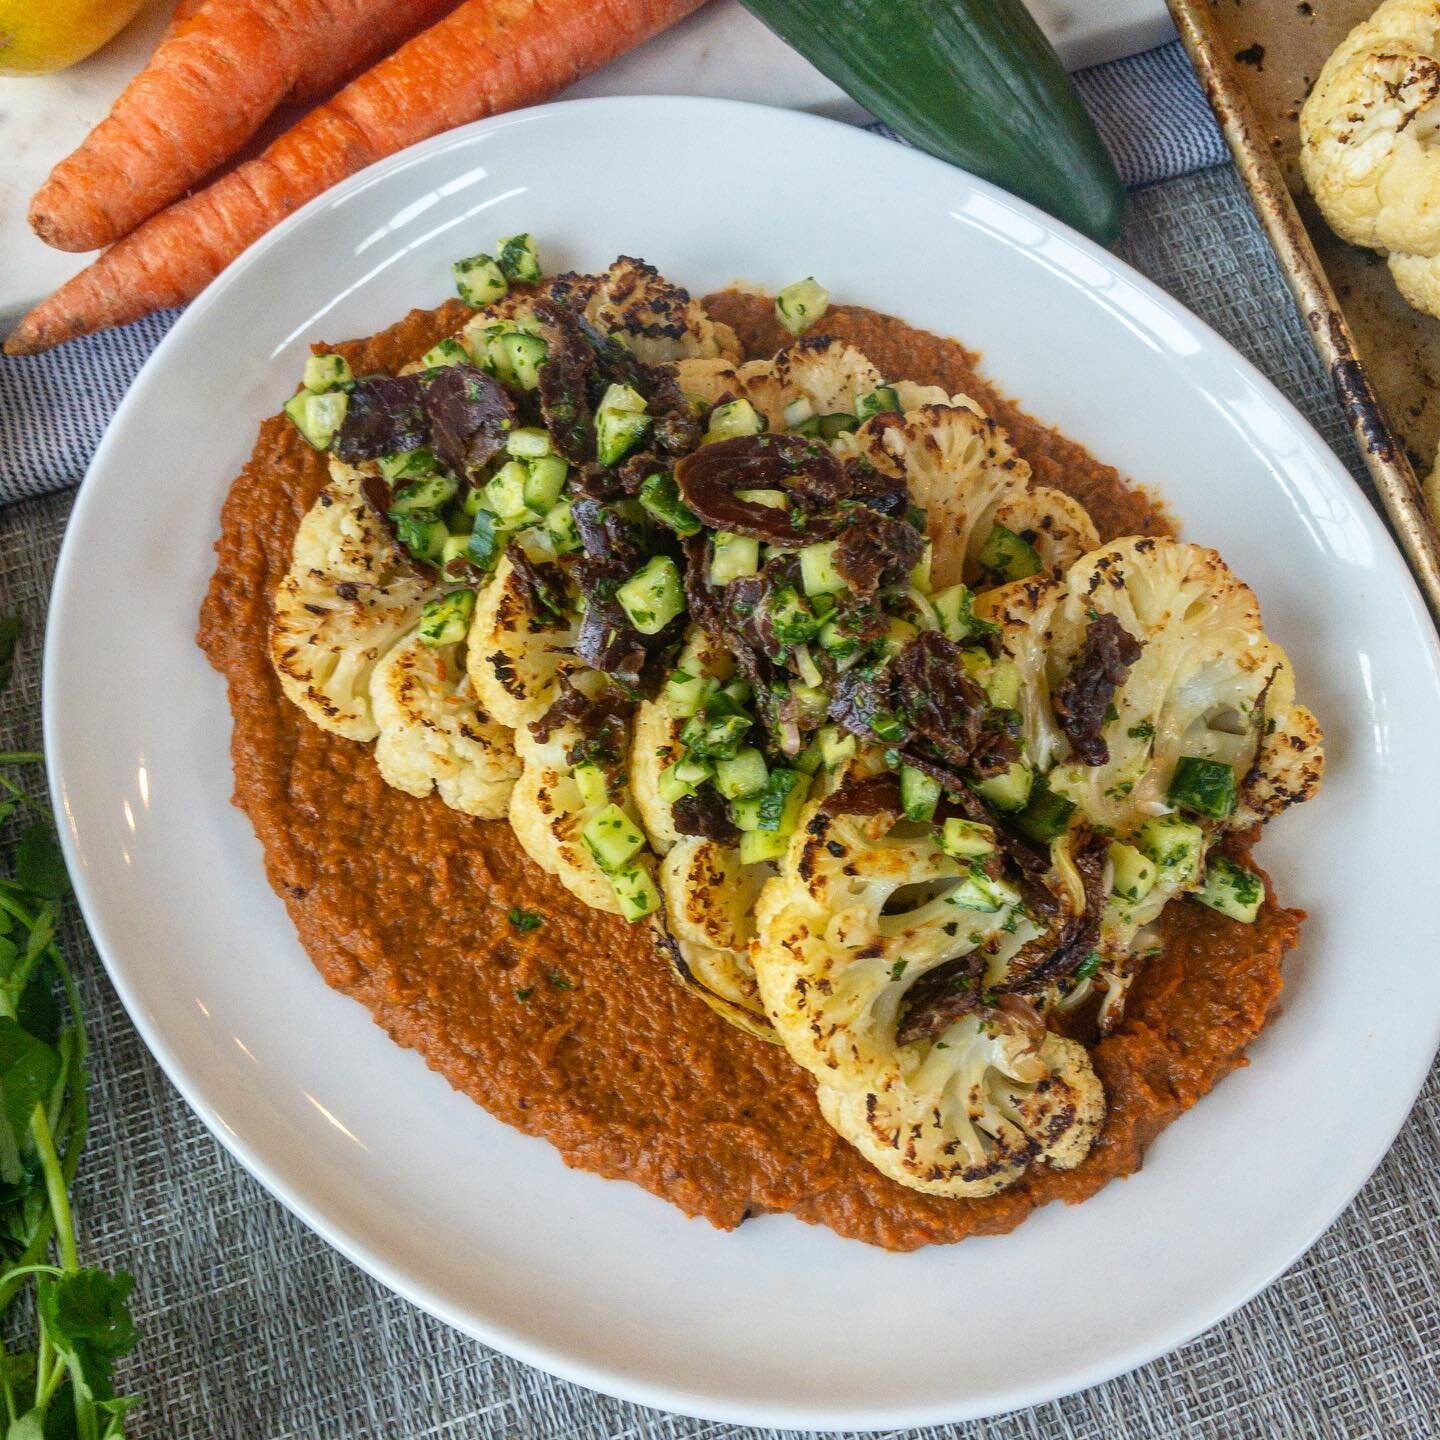 Cauliflower steaks with smoked carrot puree and cucumber mint salad. 
If you&rsquo;re craving some variety in your Keto/Paleo diet, this dish has everything. 
The buttery richness from the cauliflower steaks sits atop a smoked and charred carrot pure